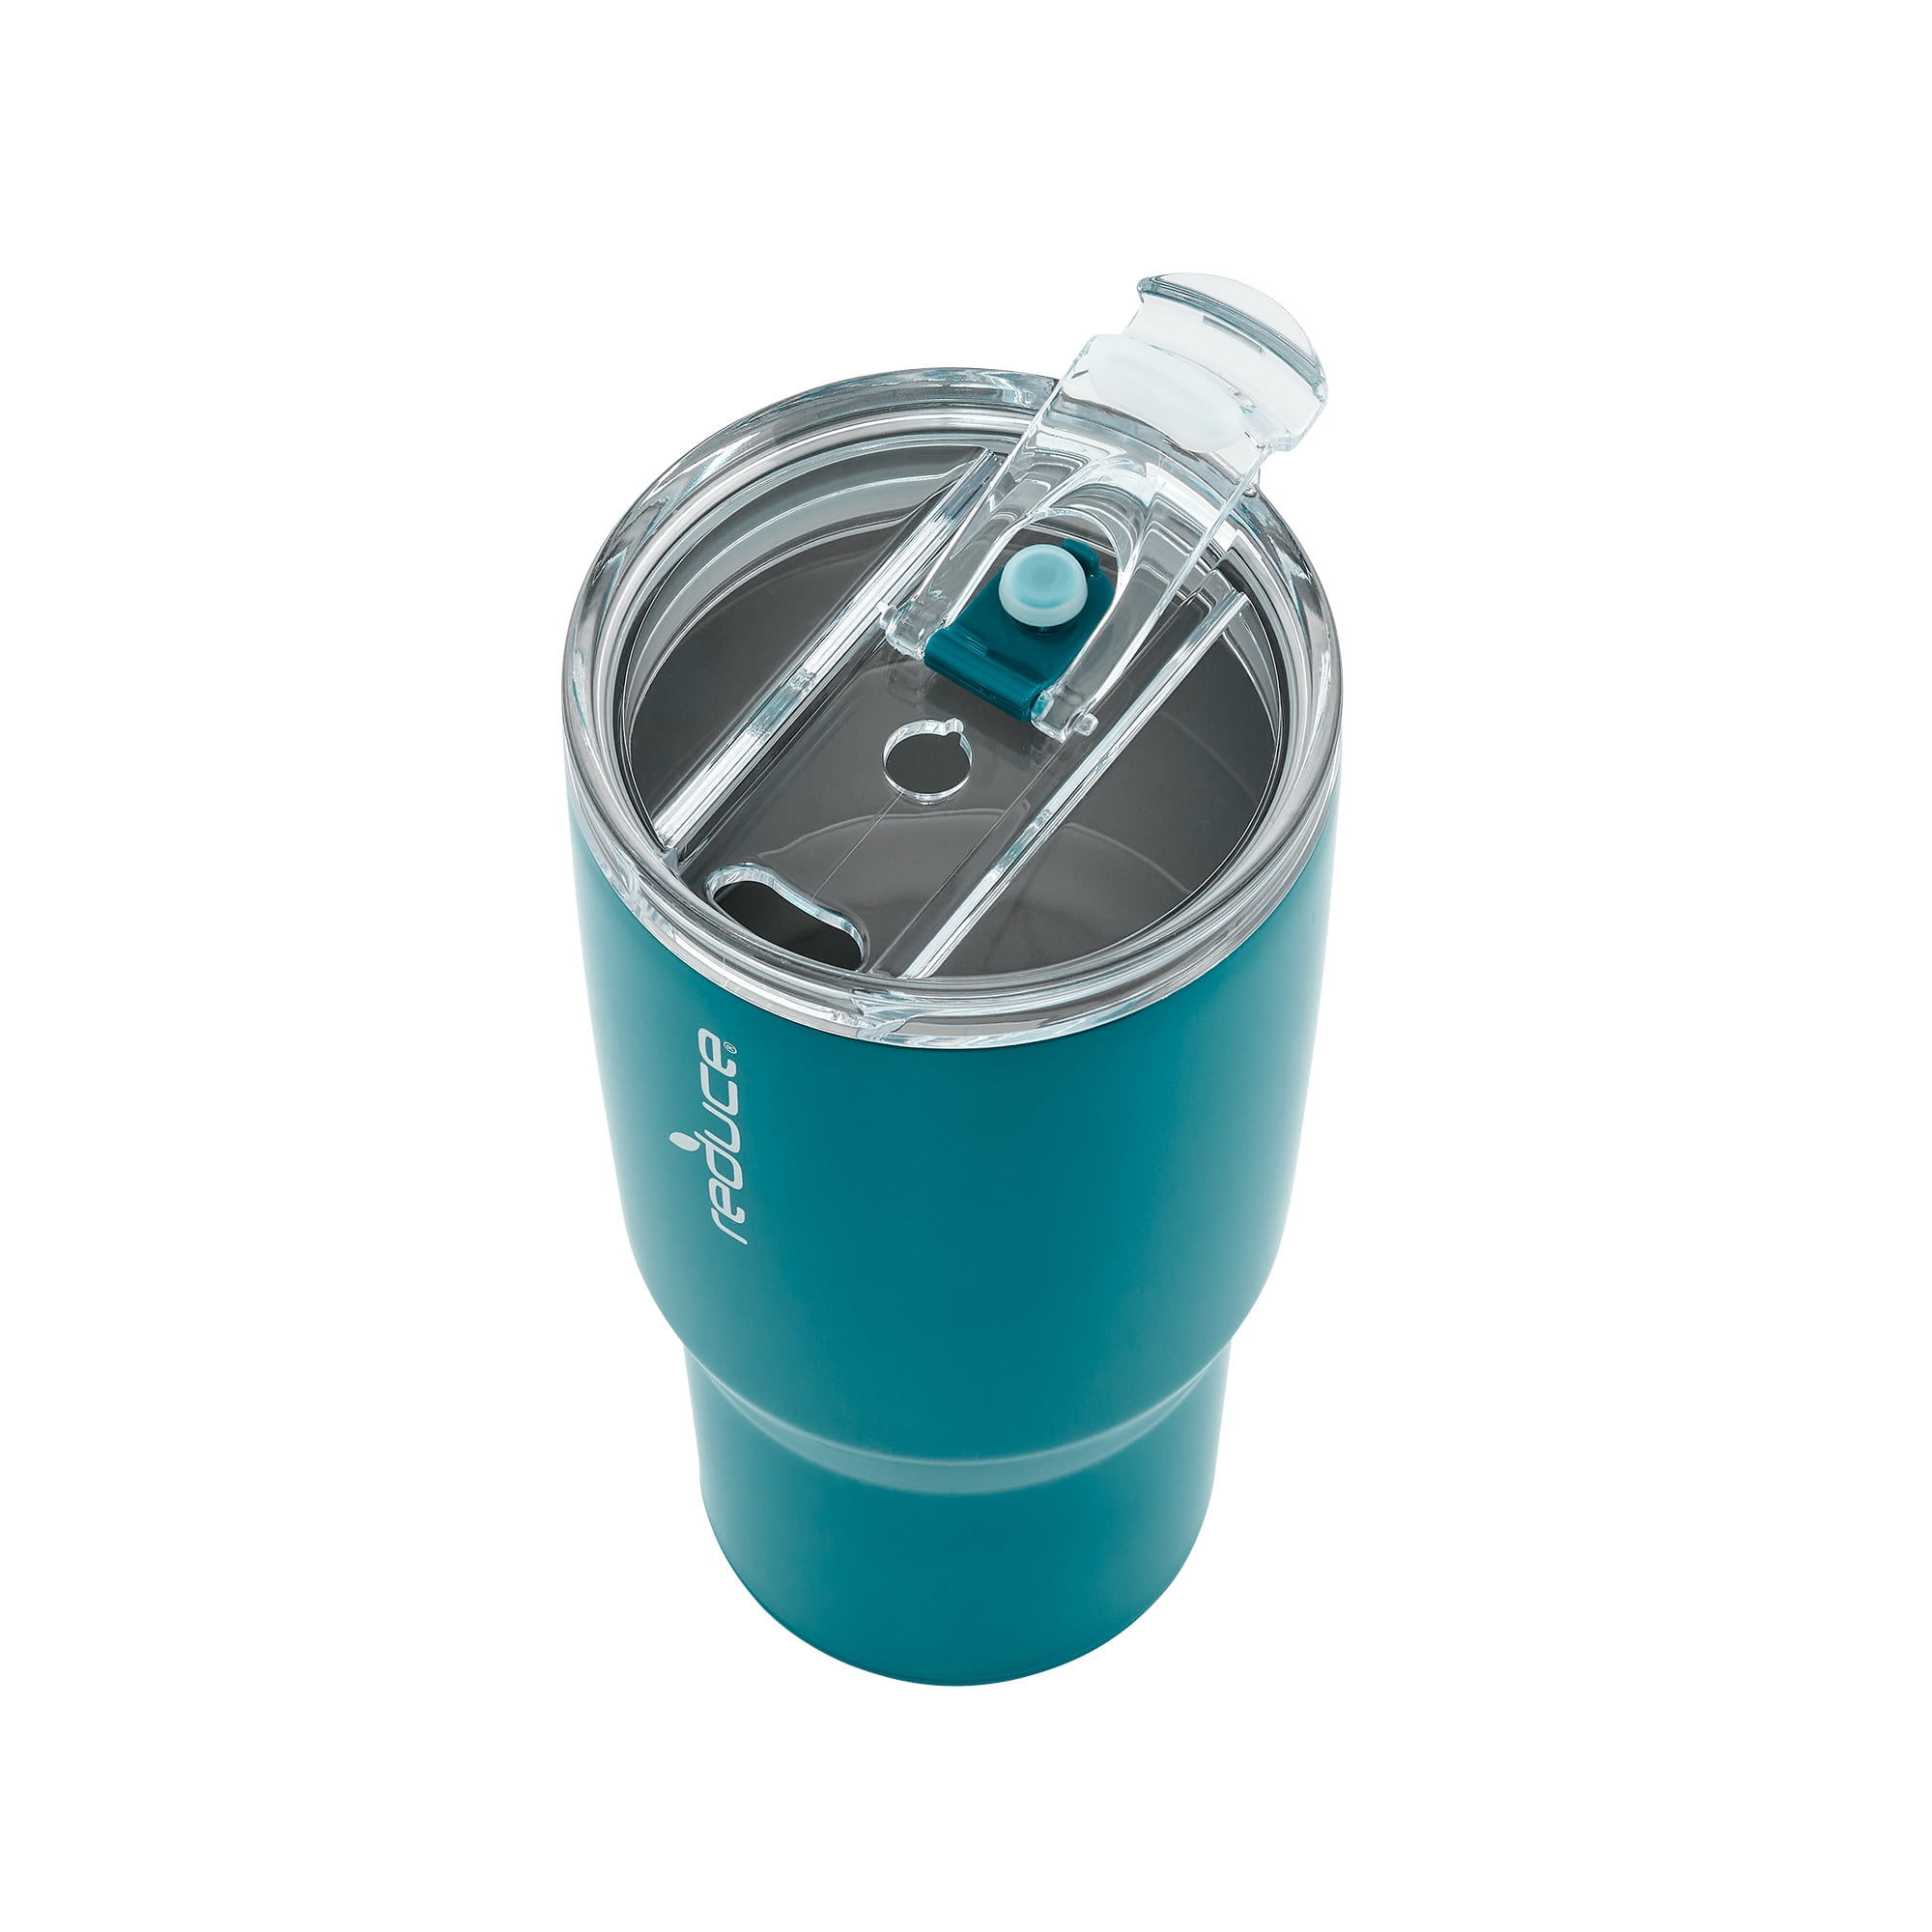 COLD1 PRO Tumbler Replacement Lid - Reduce Everyday